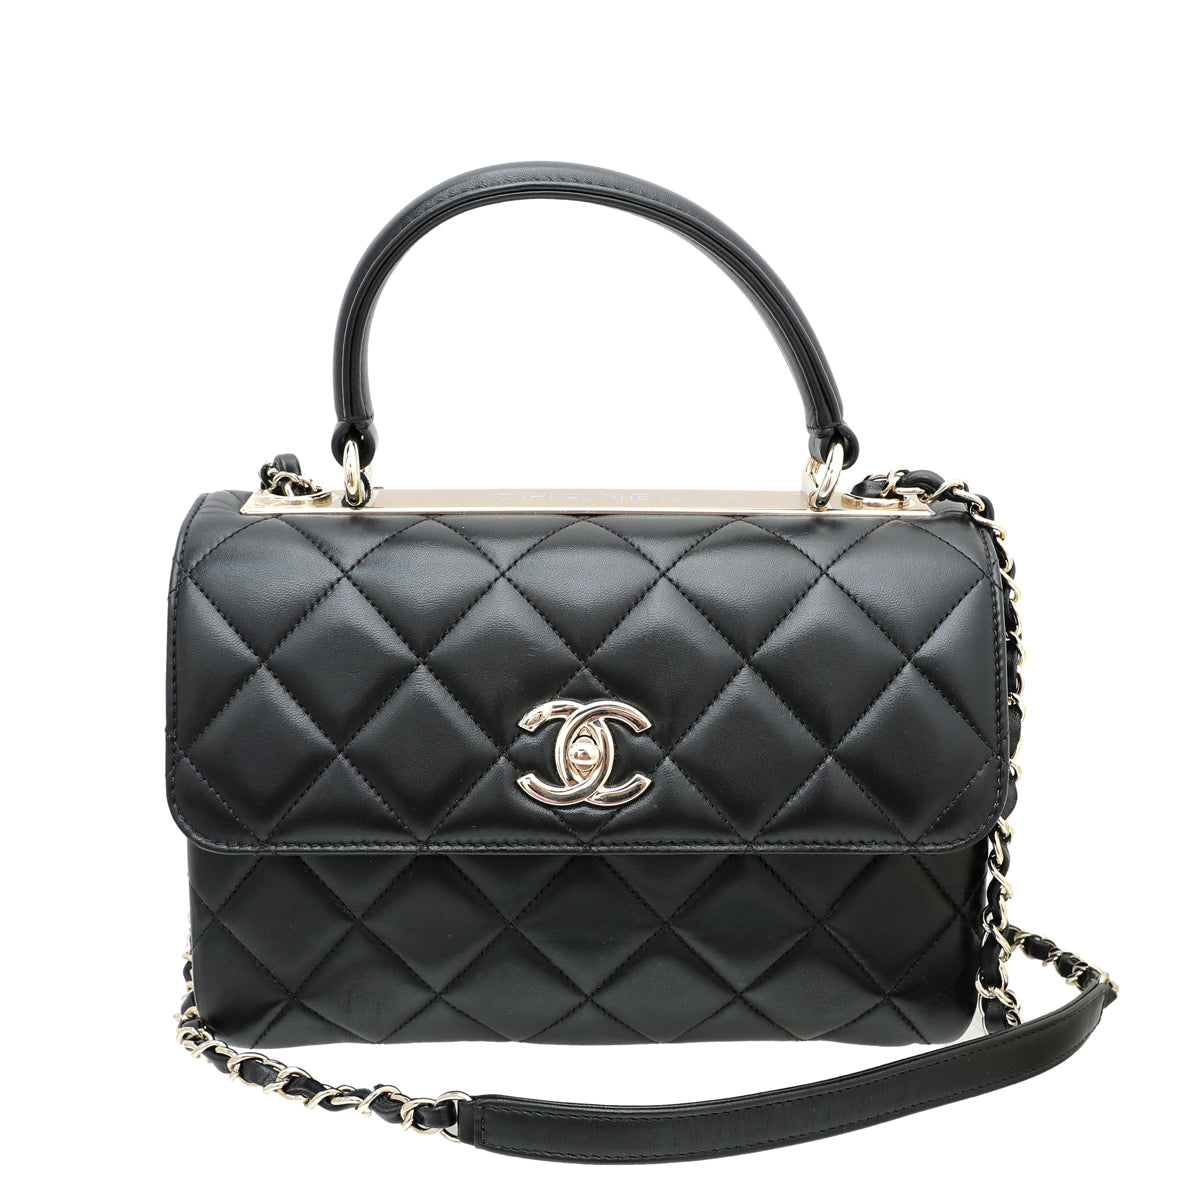 Trendy cc top handle leather handbag Chanel Black in Leather - 35789019